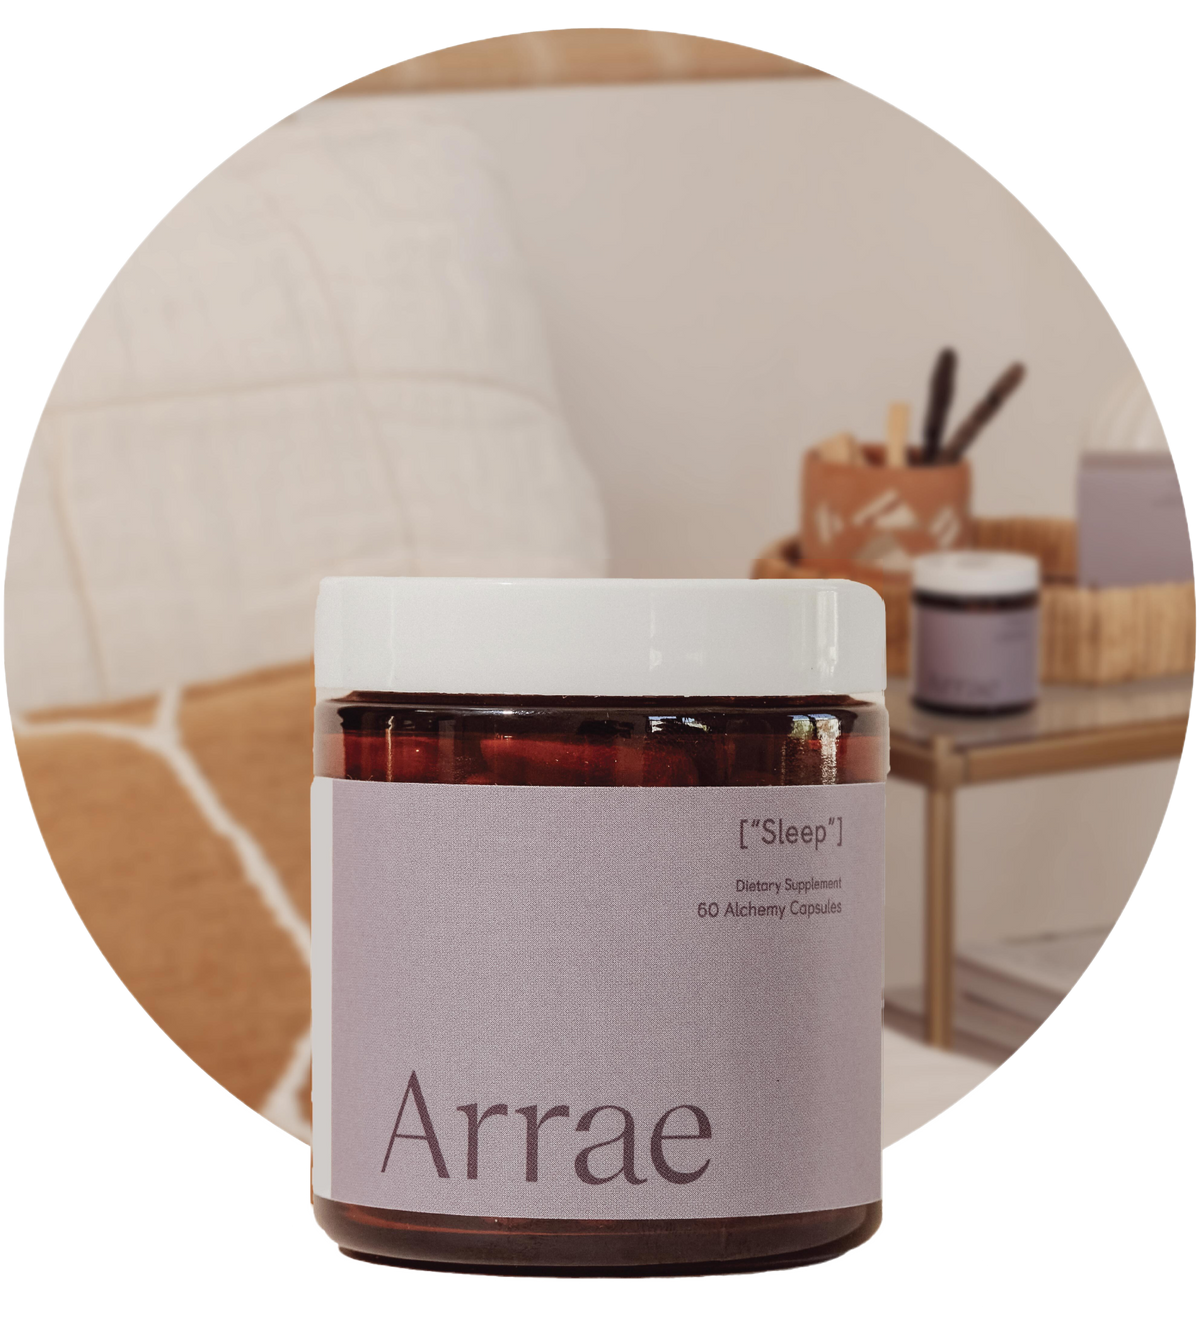 Arrae Sleep Supplement - A bottle of 60 capsules featuring a blend of natural ingredients, designed to promote restful sleep and relaxation without melatonin.